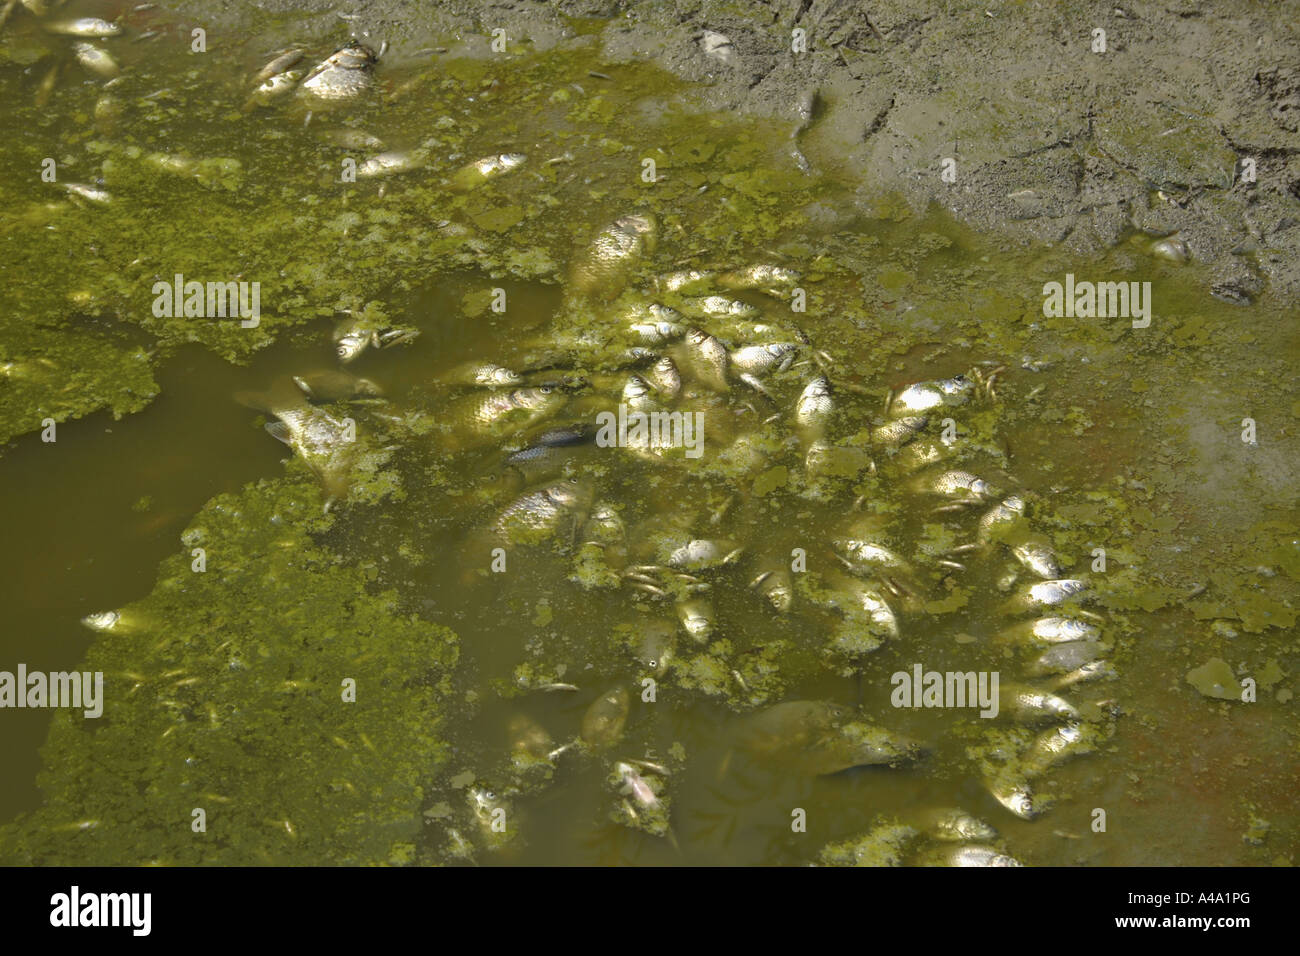 fish mortality due to eutrophication in summerheat, Germany, Bavaria, Oberbayern Stock Photo